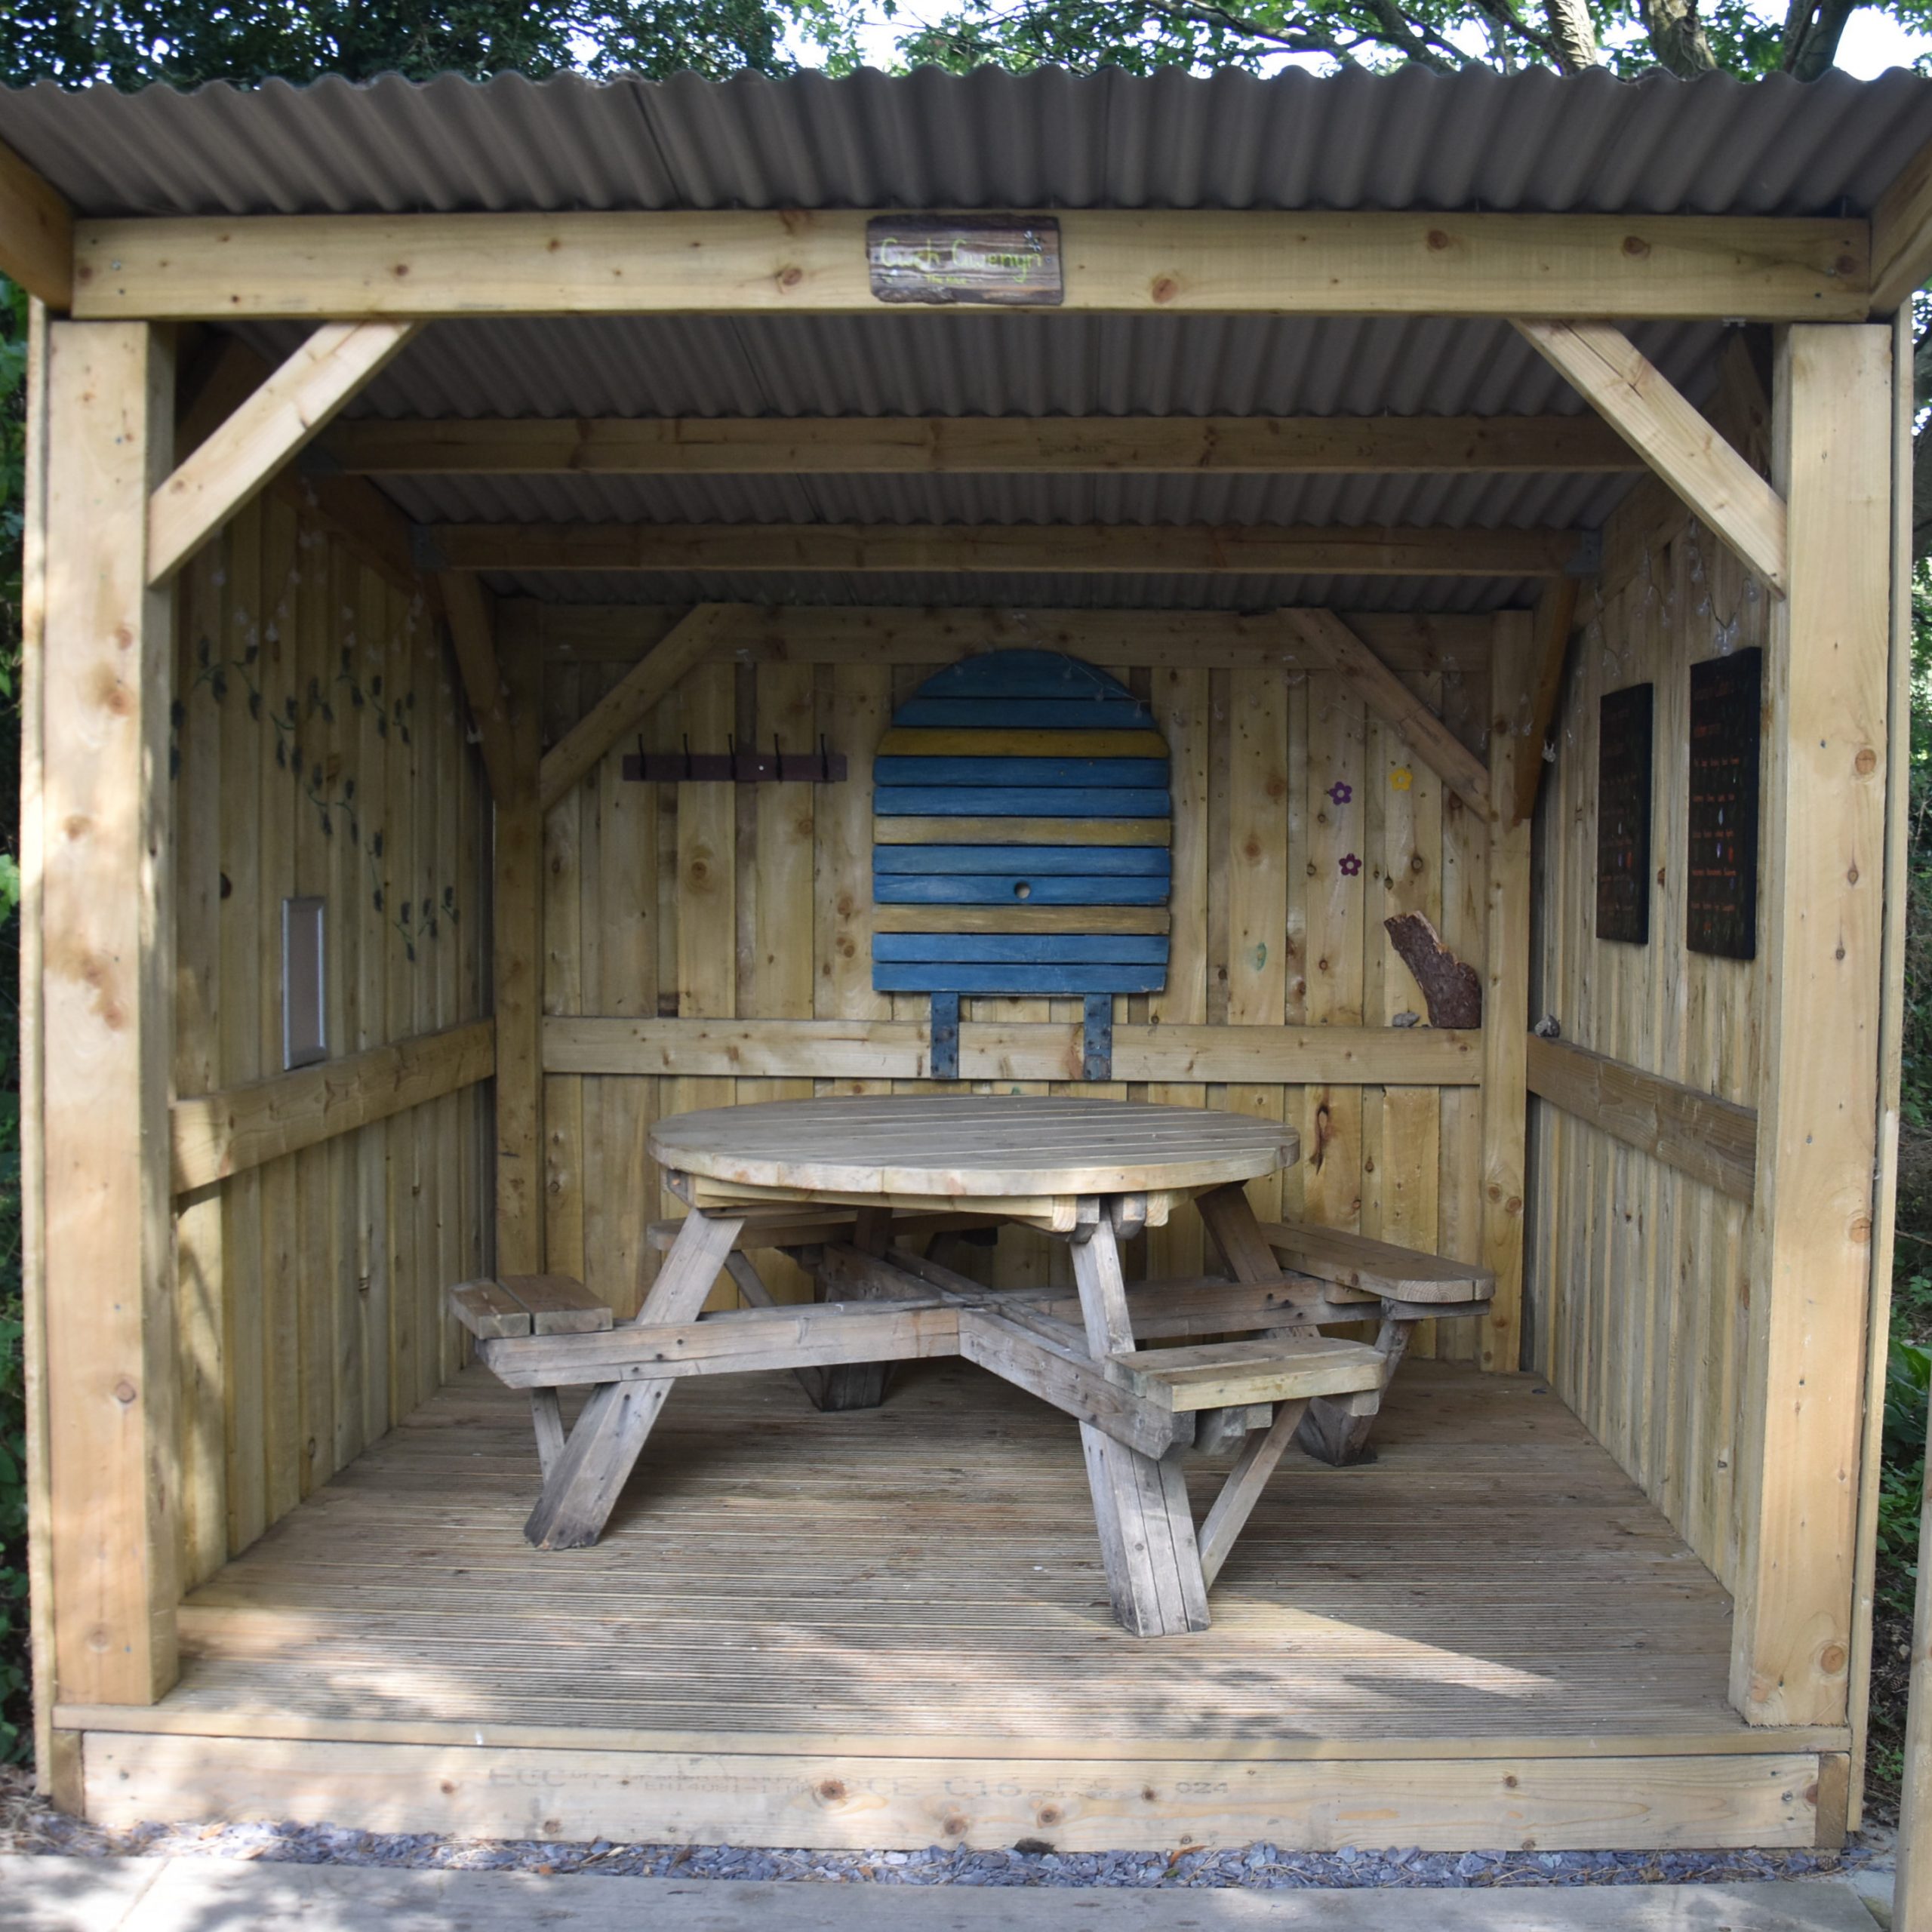 One of the cabins, known as Cwch Gwenyn (The Hive), in the garden at the back of Caffi Caban.